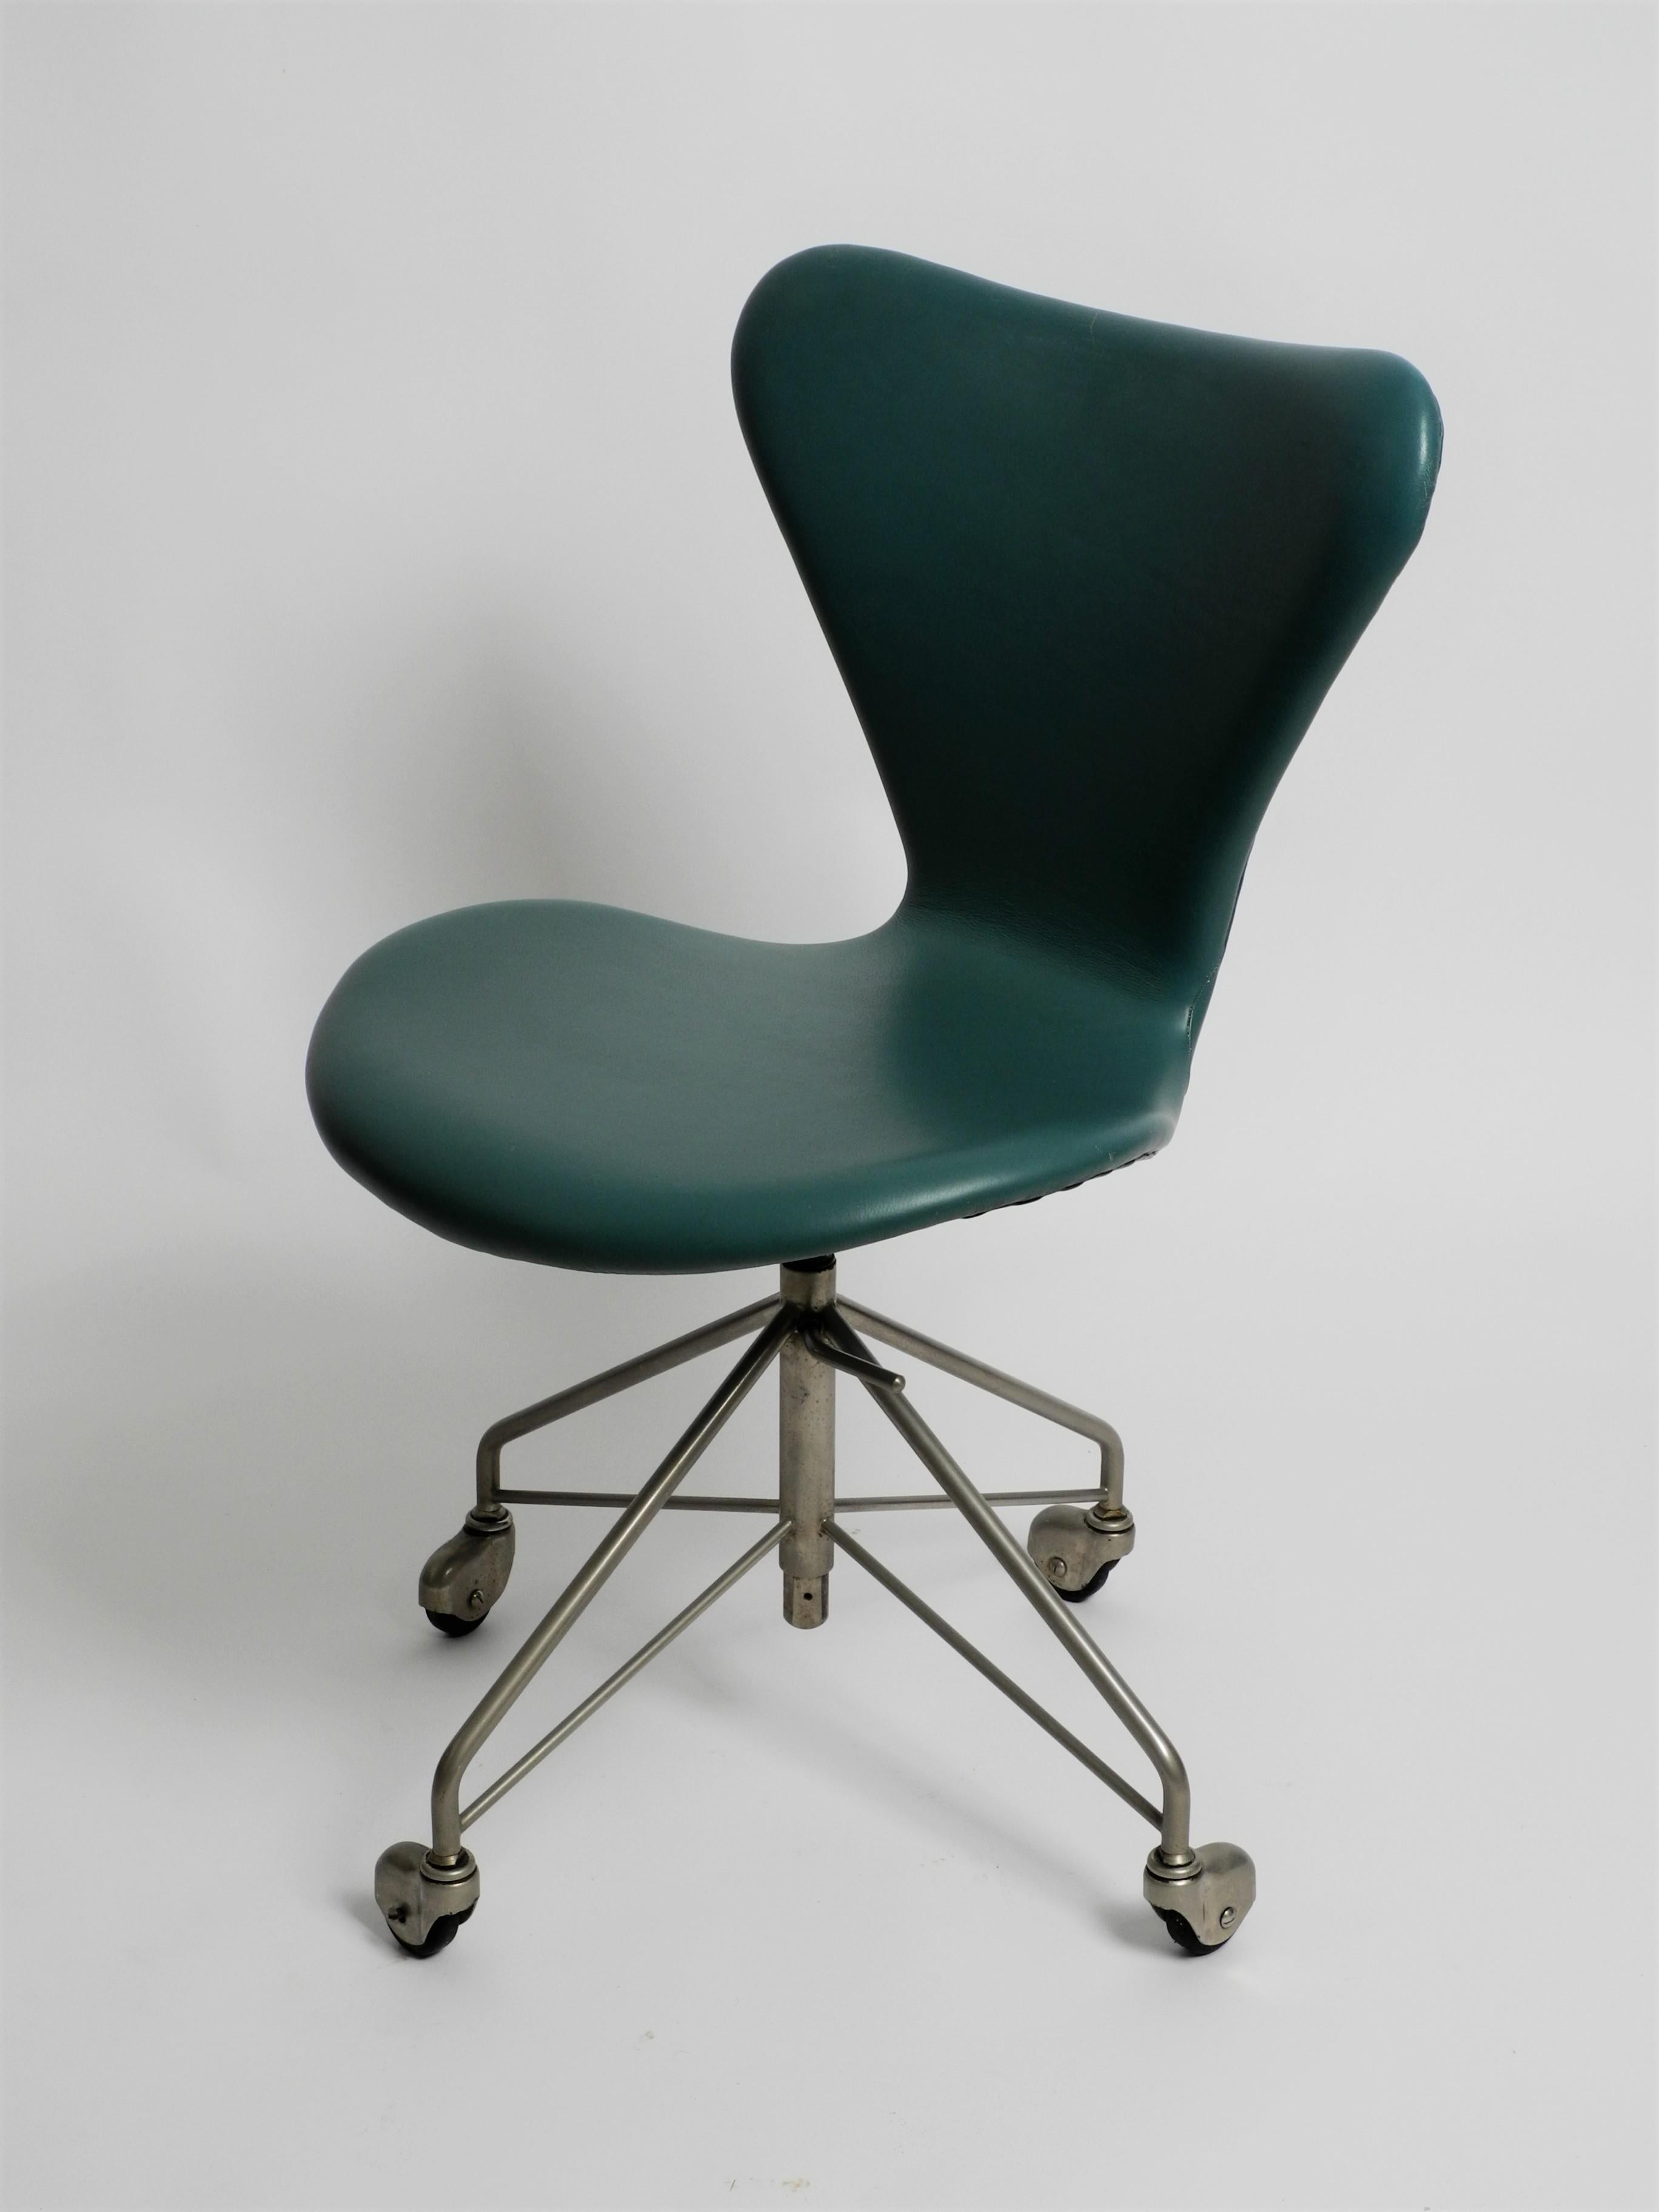 Early Arne Jacobsen 3117 Office Chair by Fritz Hansen Turqouise Faux Leather For Sale 2